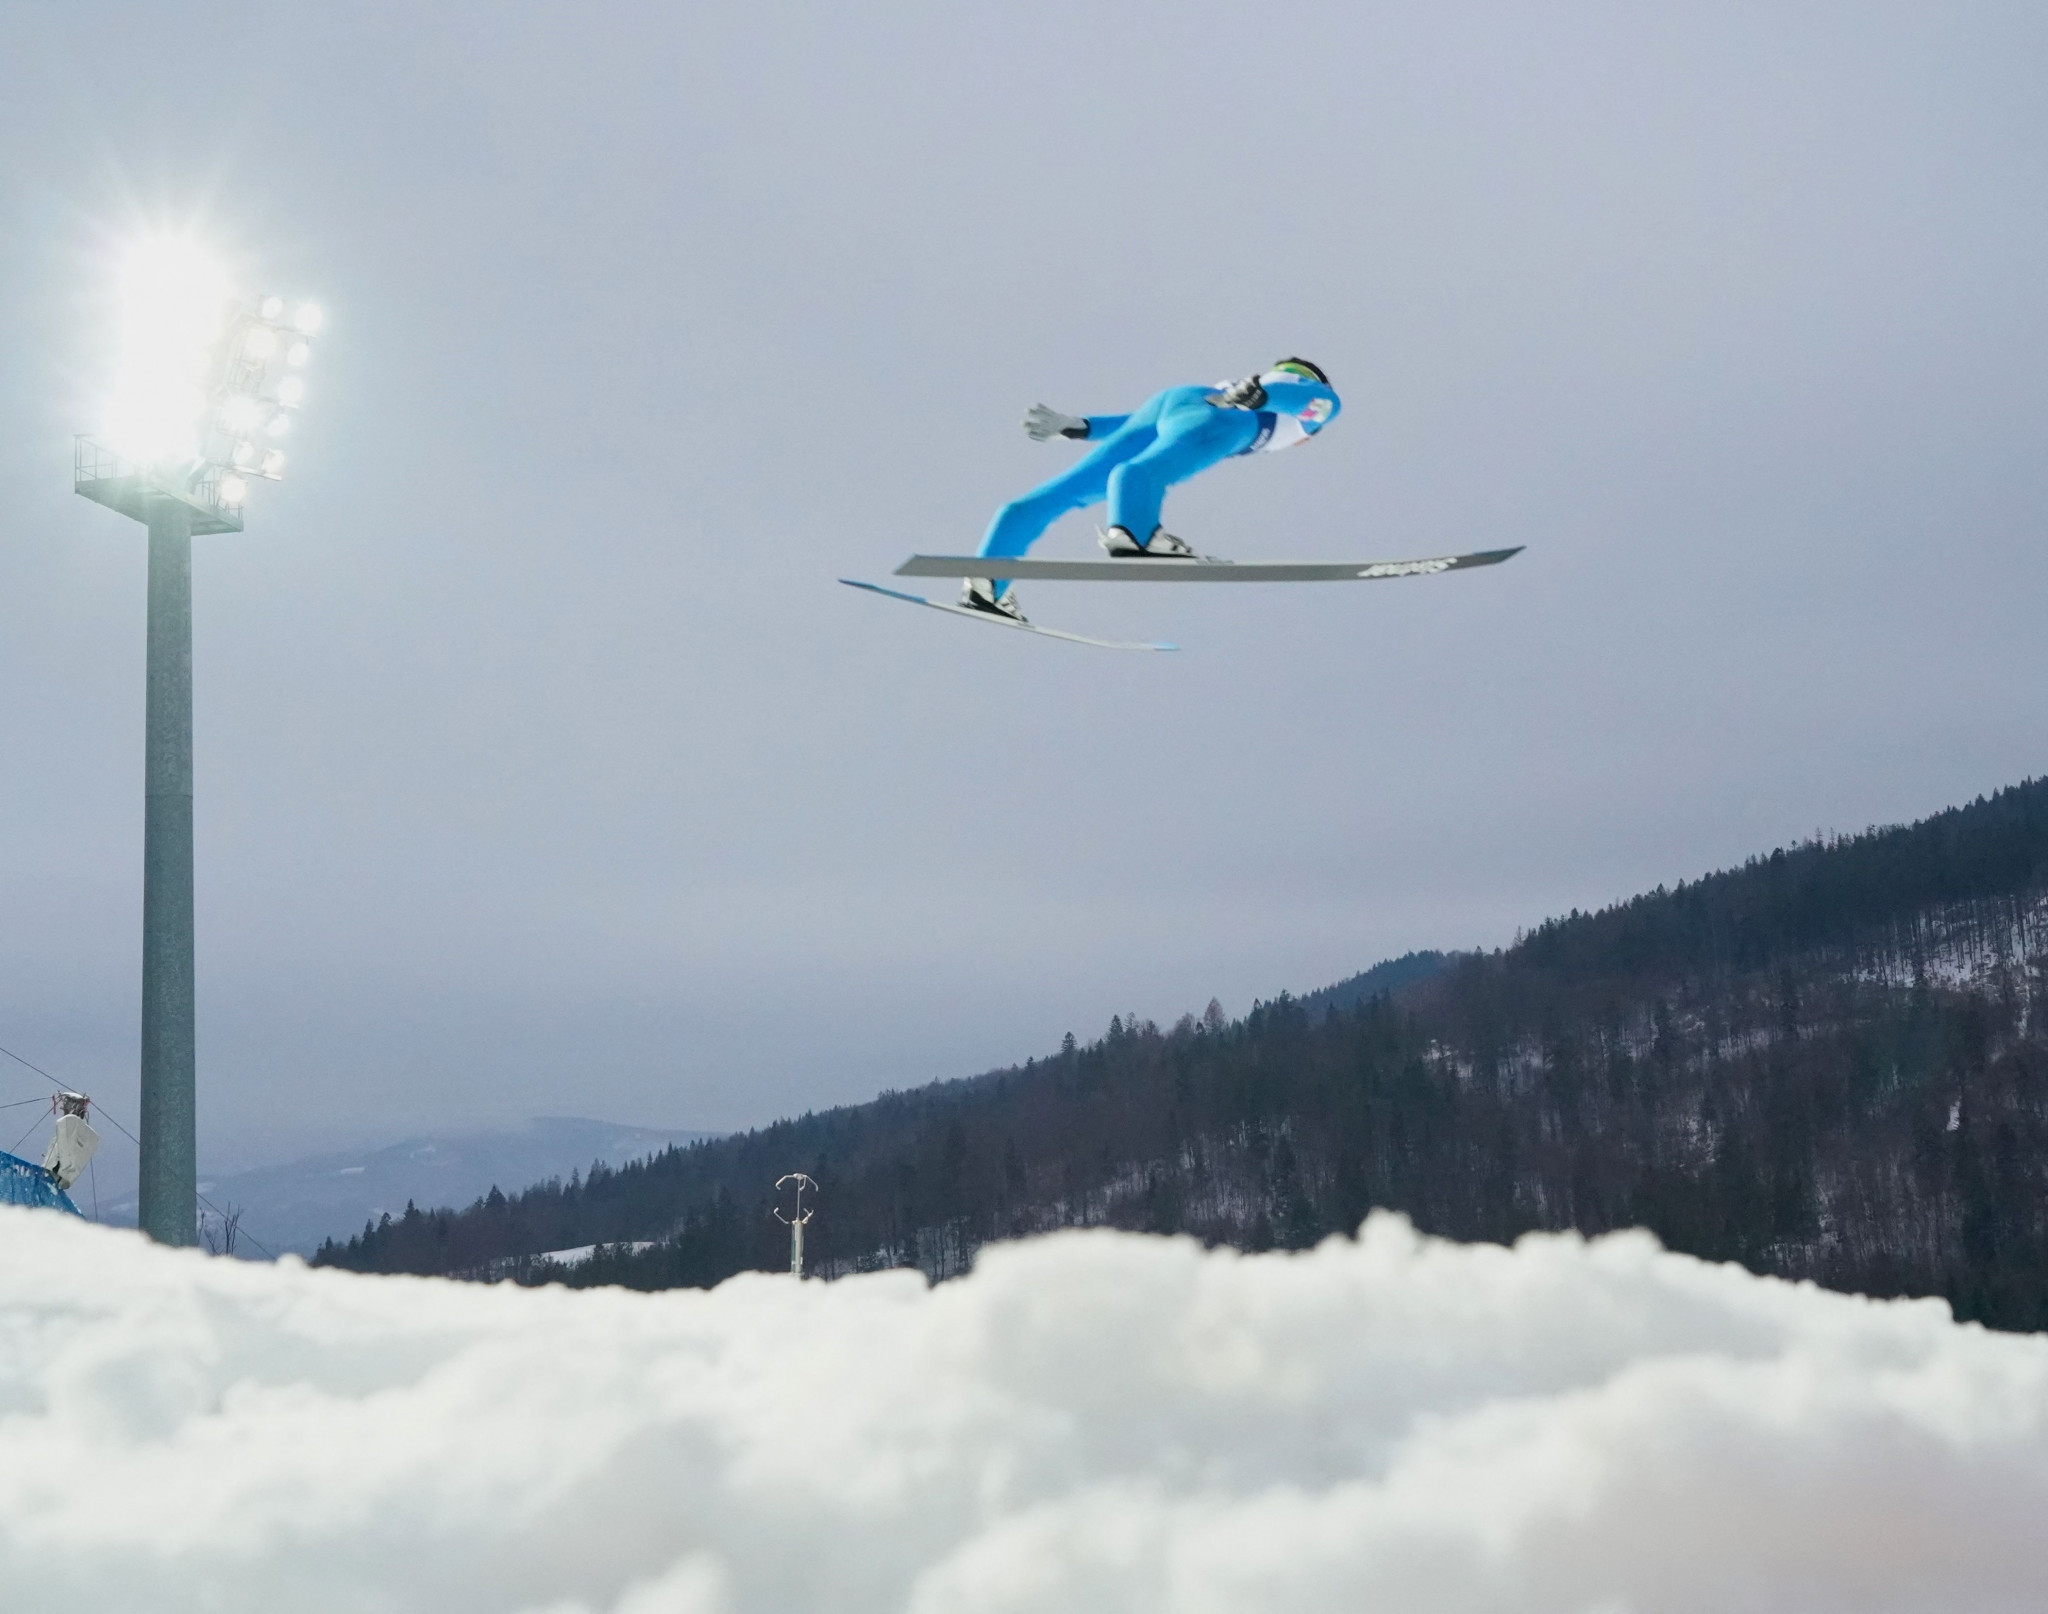 The 2022-2023 FIS Ski Jumping World Cup is due to begin in Wisła from November 4 to 6 ©Getty Images